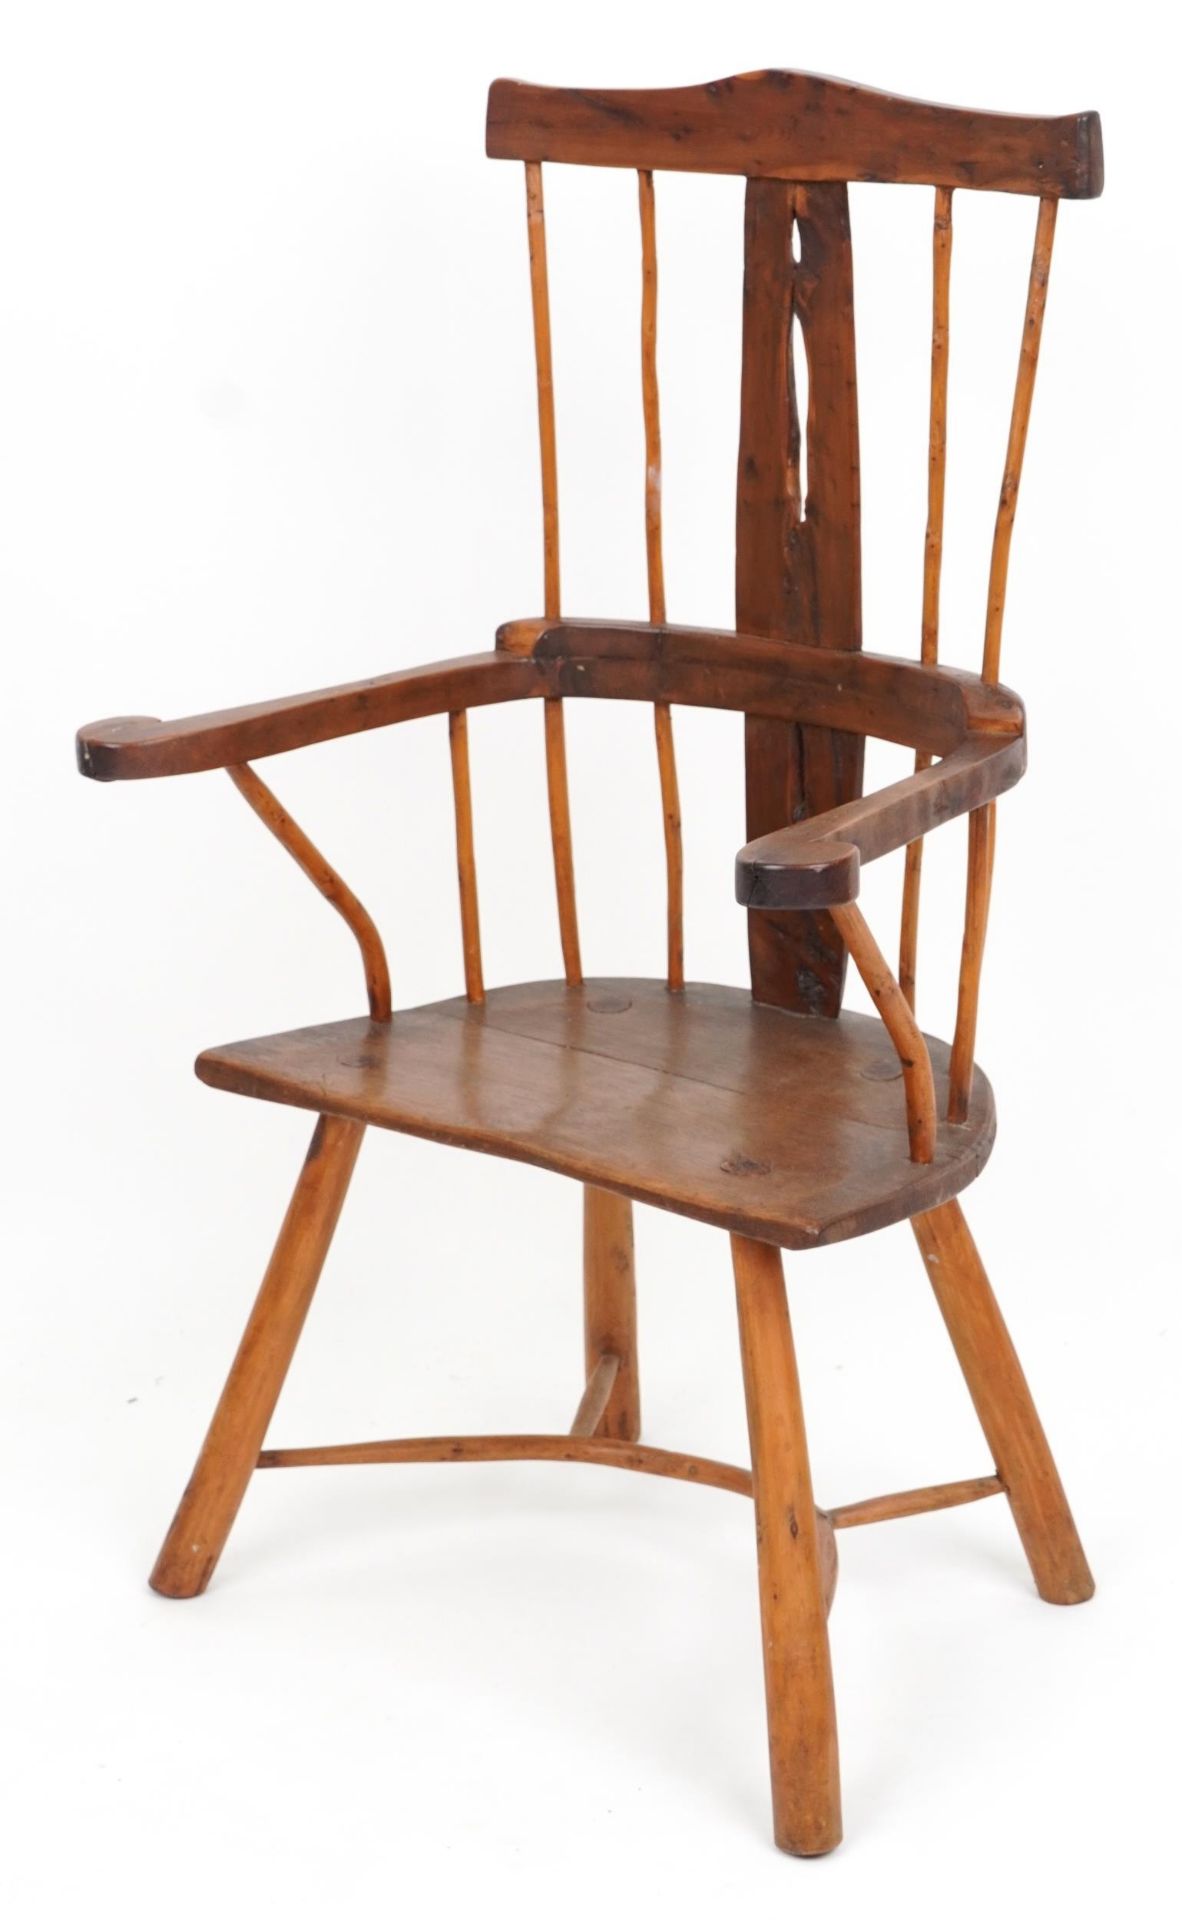 Antique country spindle back chair with pierced splat, 101cm high